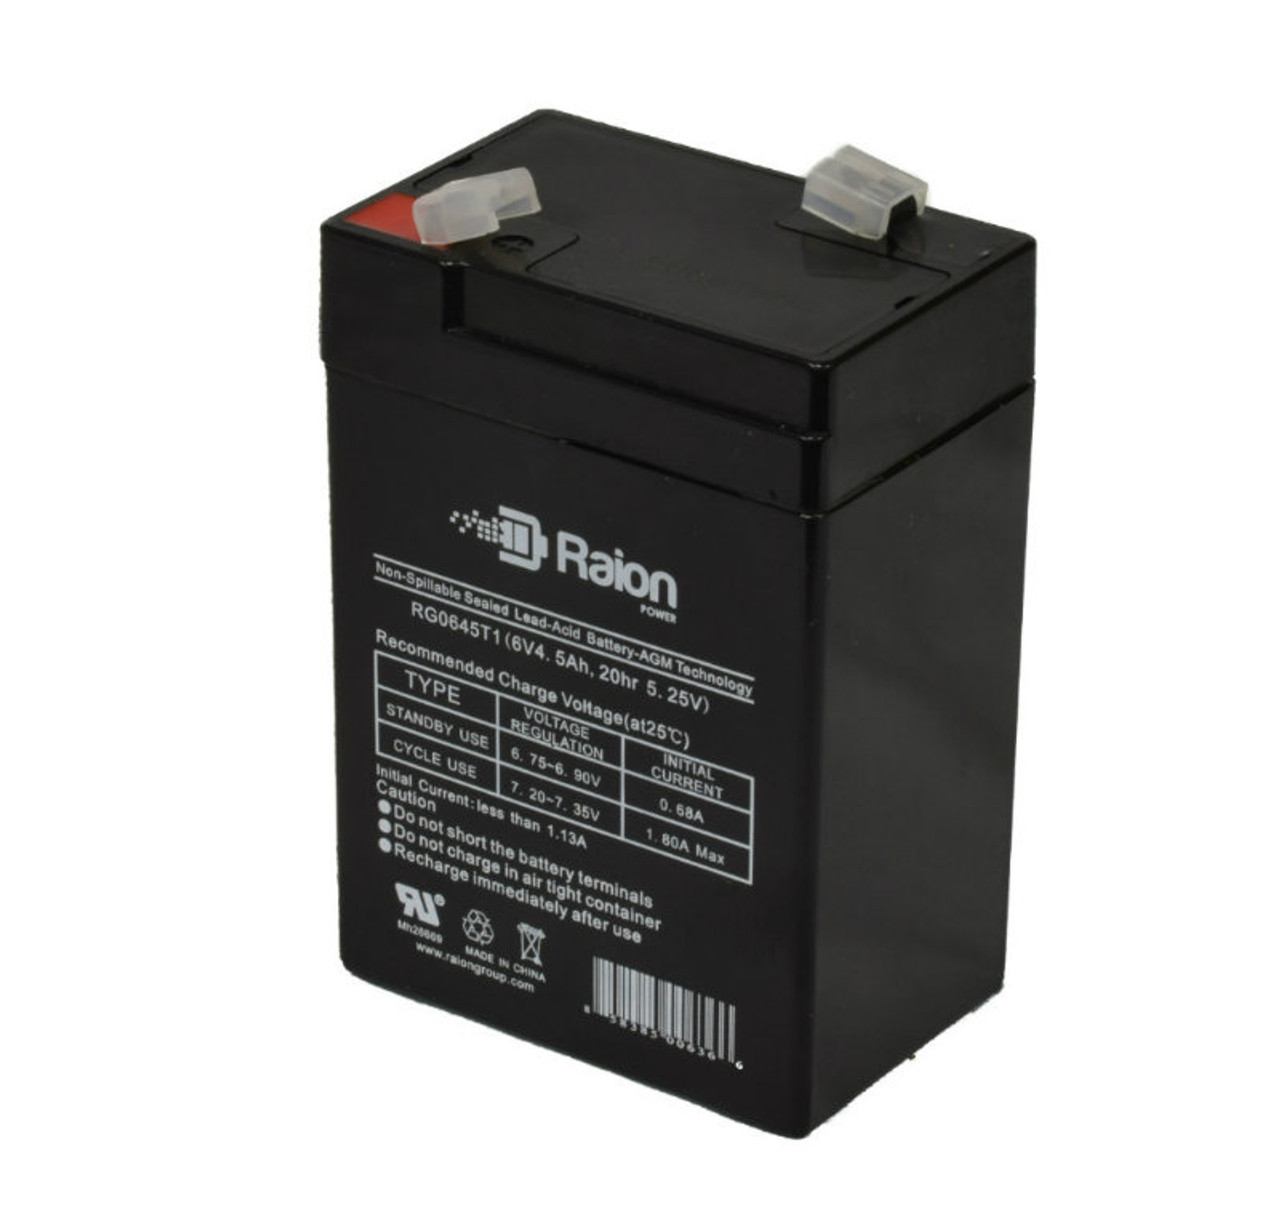 Raion Power RG0645T1 6V 4.5Ah Replacement Battery Cartridge for Unibo GB6-4.5